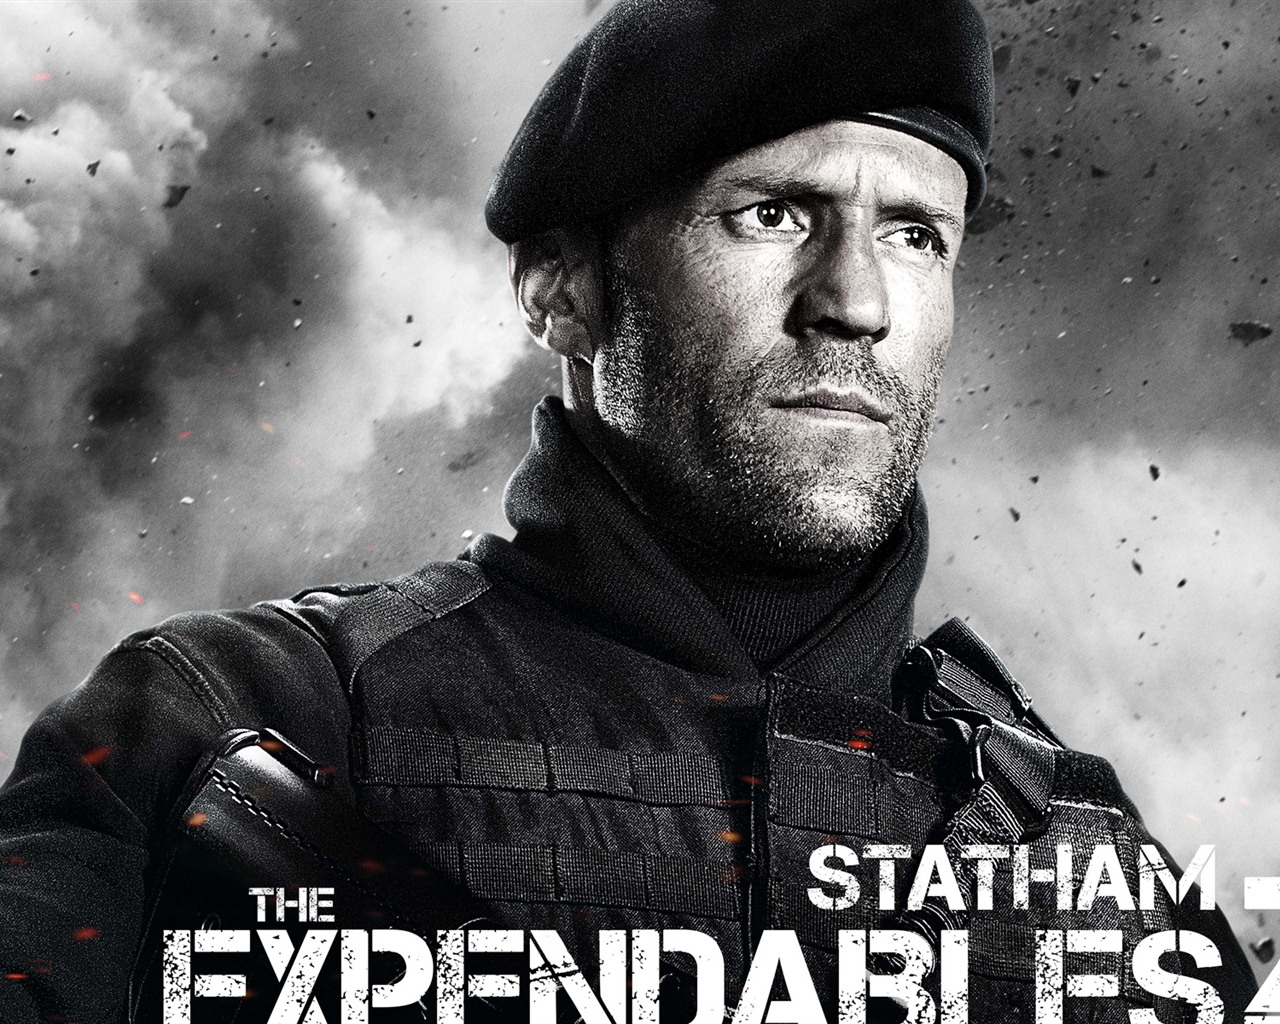 2012 Expendables2 HDの壁紙 #5 - 1280x1024